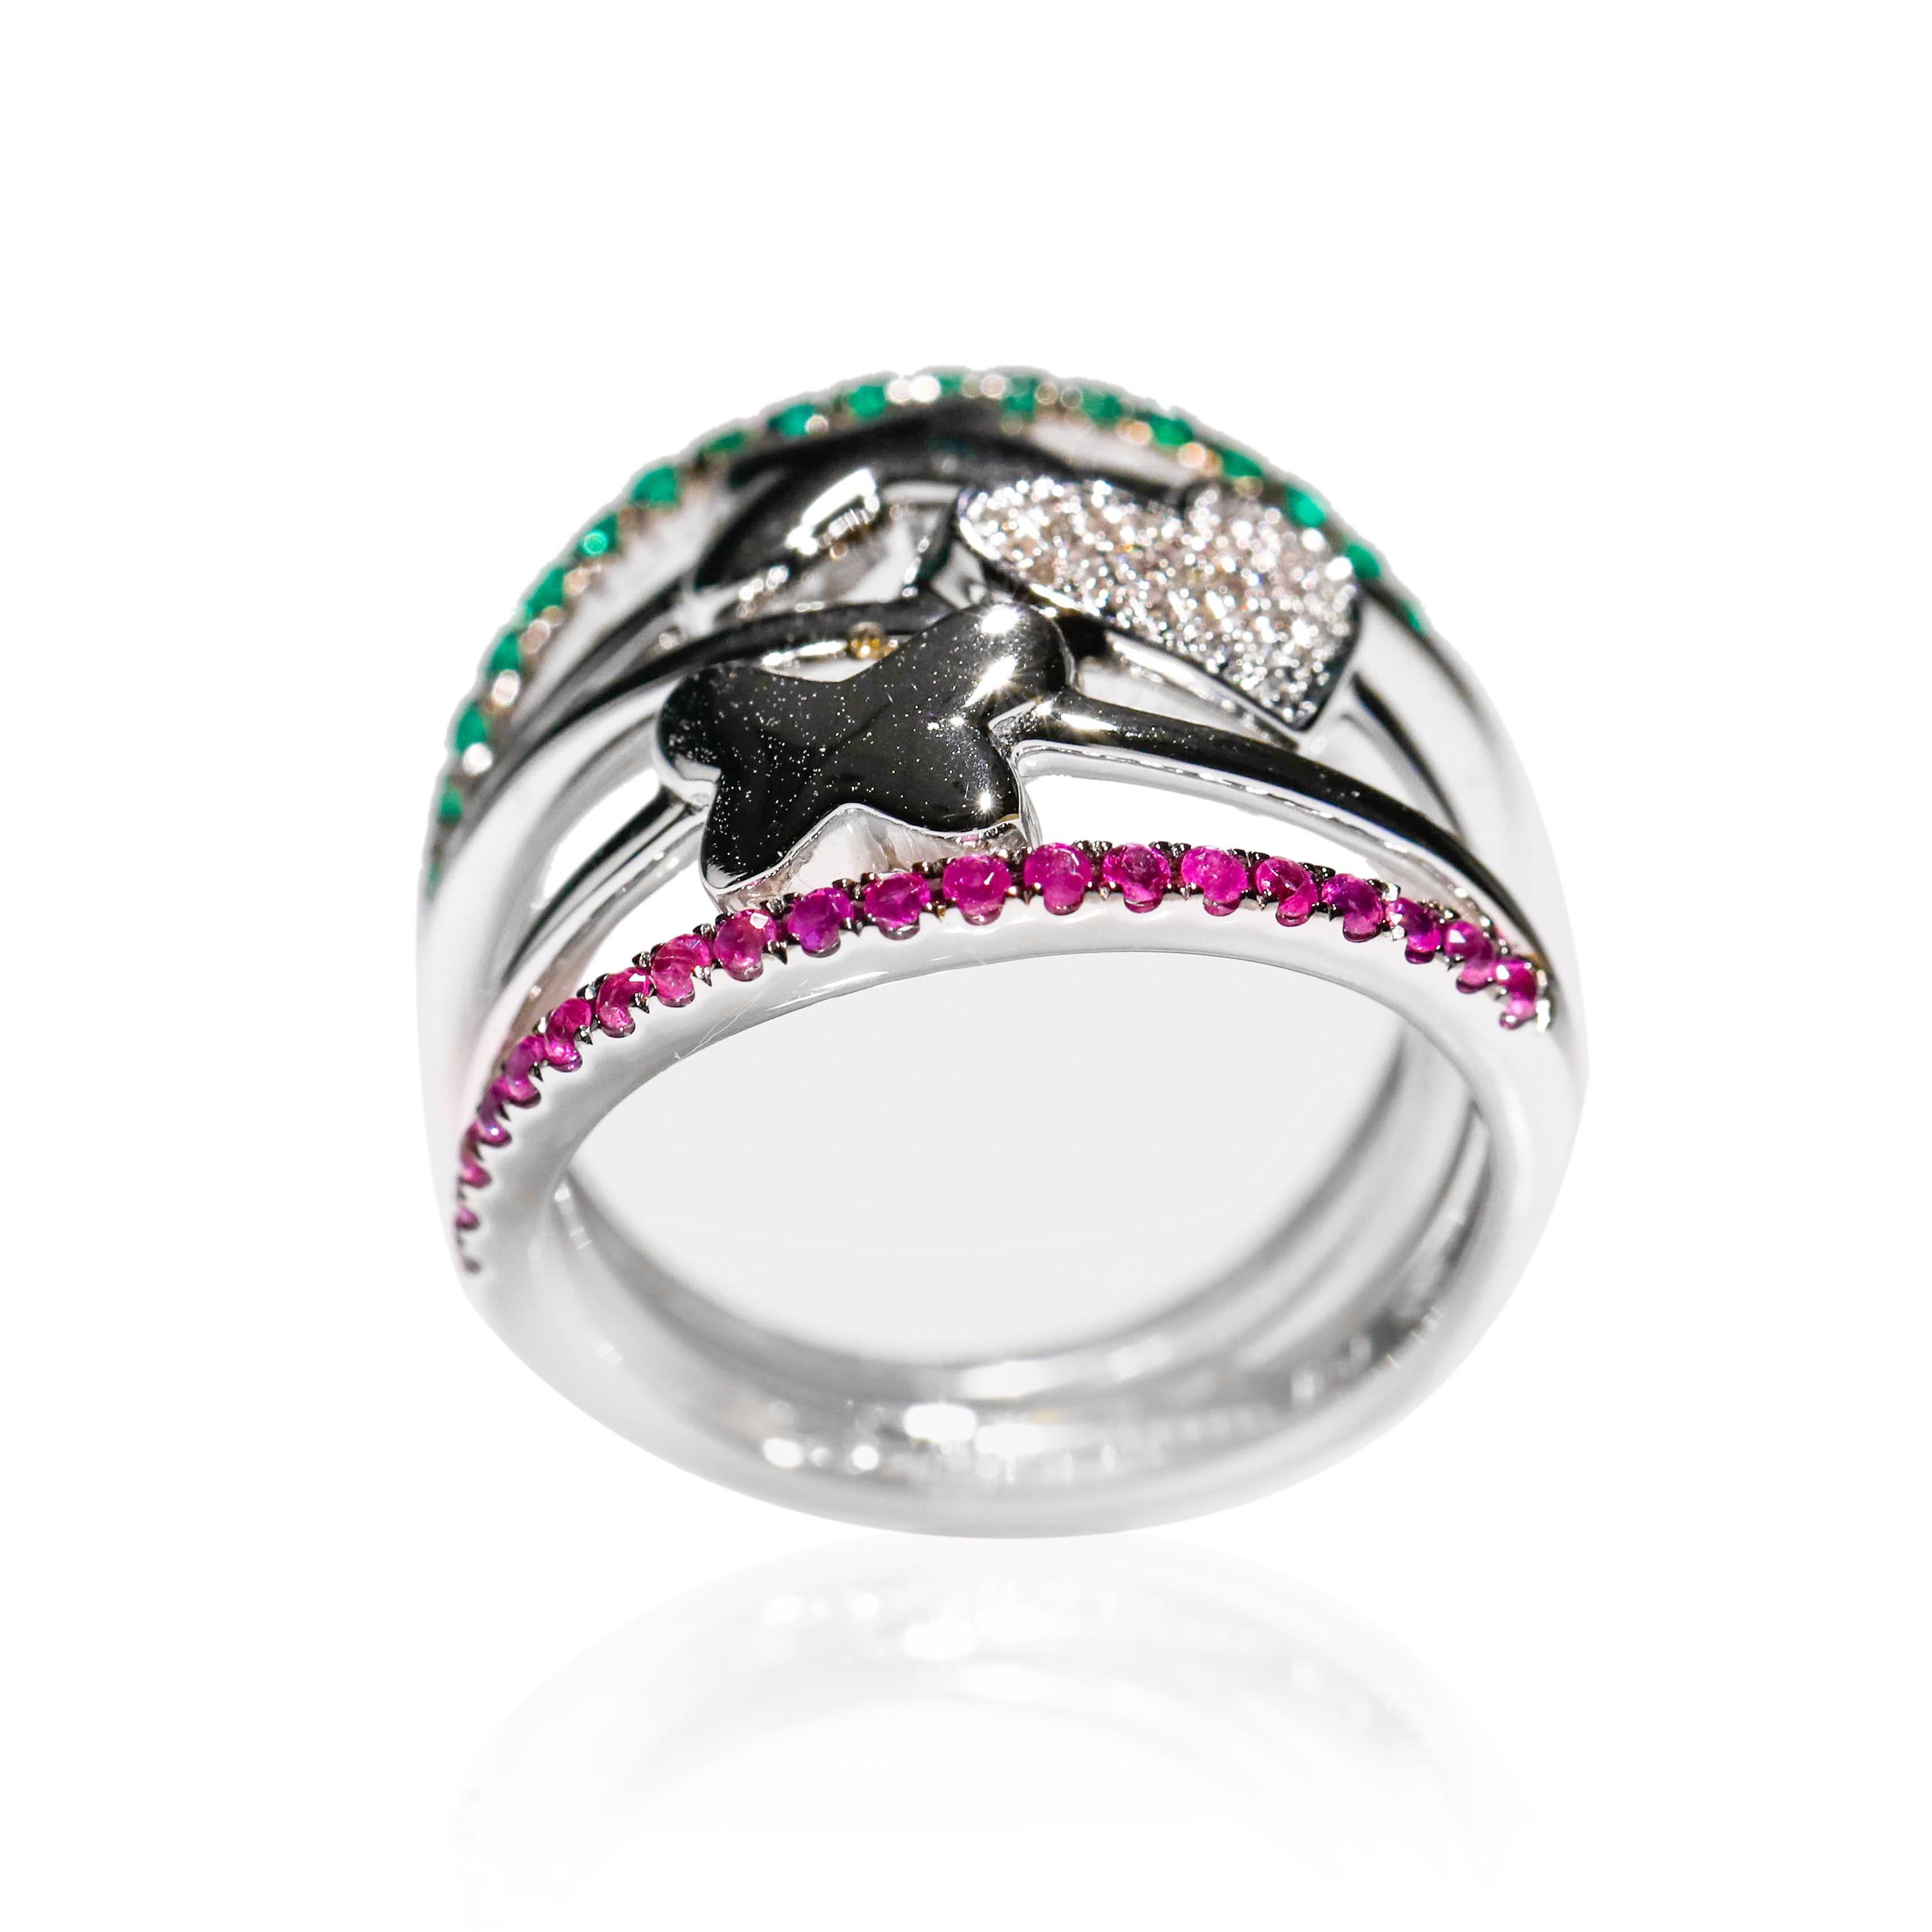 14 Karat White Gold Diamond Ruby Emerald Butterfly Heart Ring Size 5.25

Show off your fashion style with this diamond wrap ring. Fashioned in stunning 14k white Gold, the ring is presenting interlocking rows of shimmering white round diamonds,